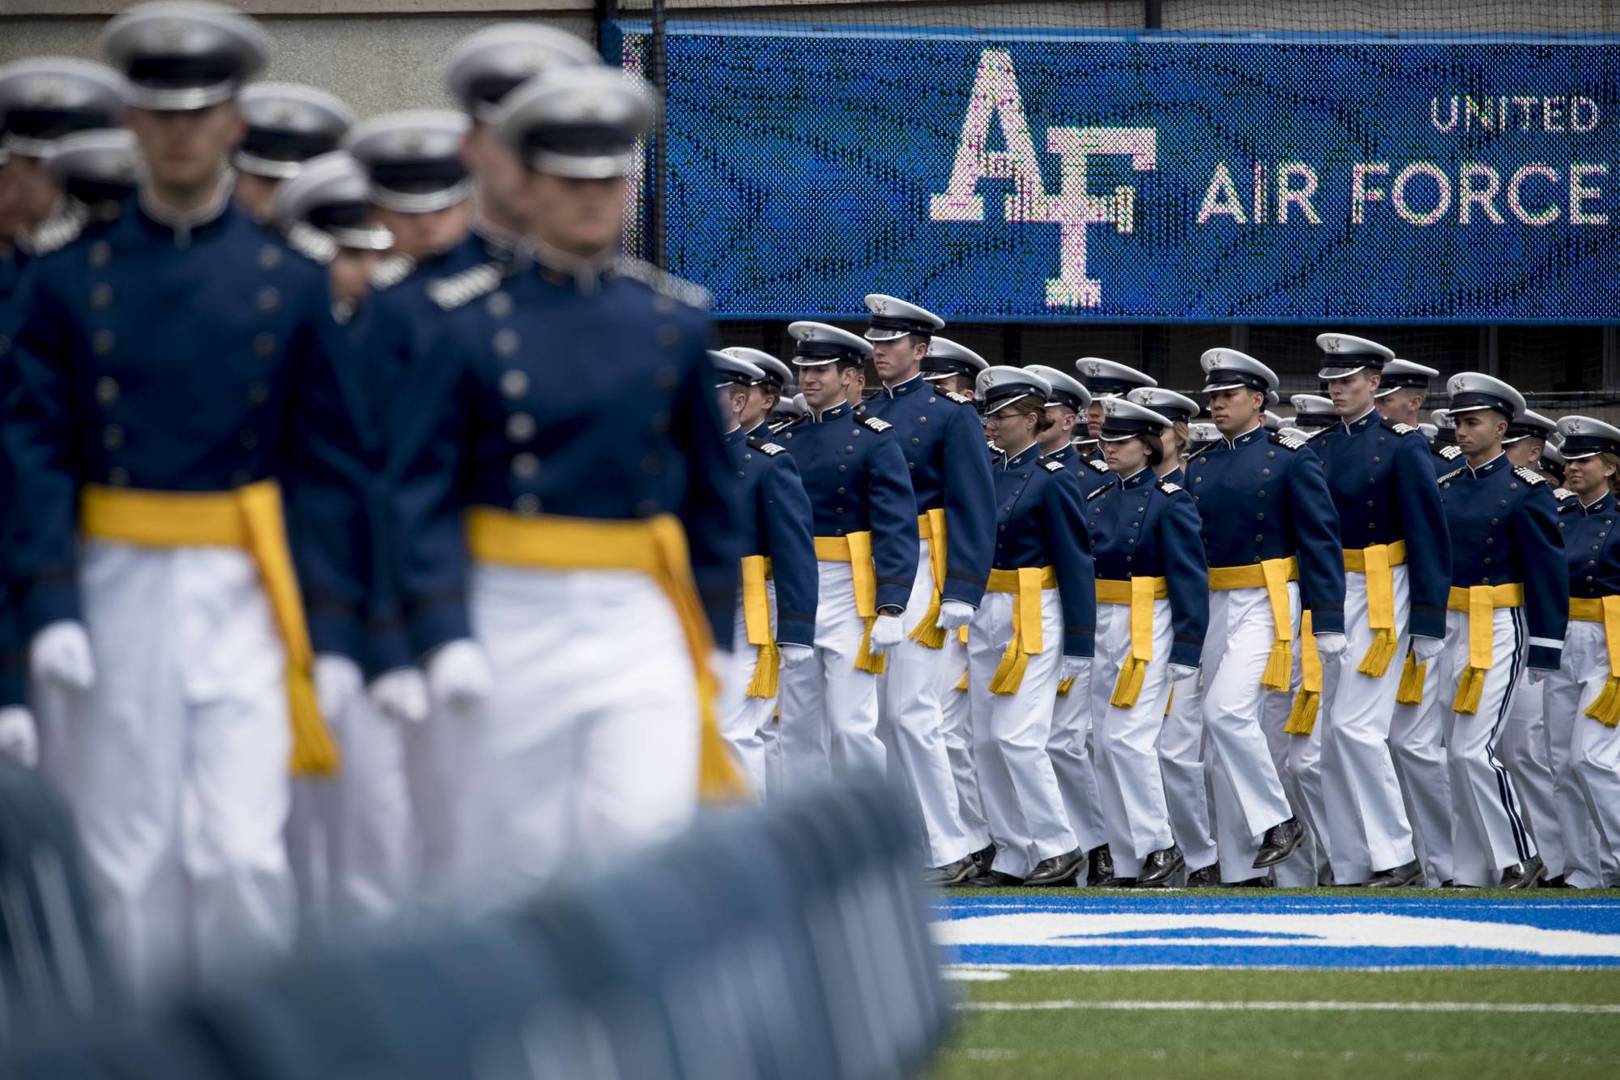 Air Force Cadets arrive at the 2019 United States Air Force Academy Graduation Ceremony at Falcon Stadium, Thursday, May 30, 2019, at the United States Air Force Academy, in Colorado Springs, Colo. (AP Photo/Andrew Harnik)